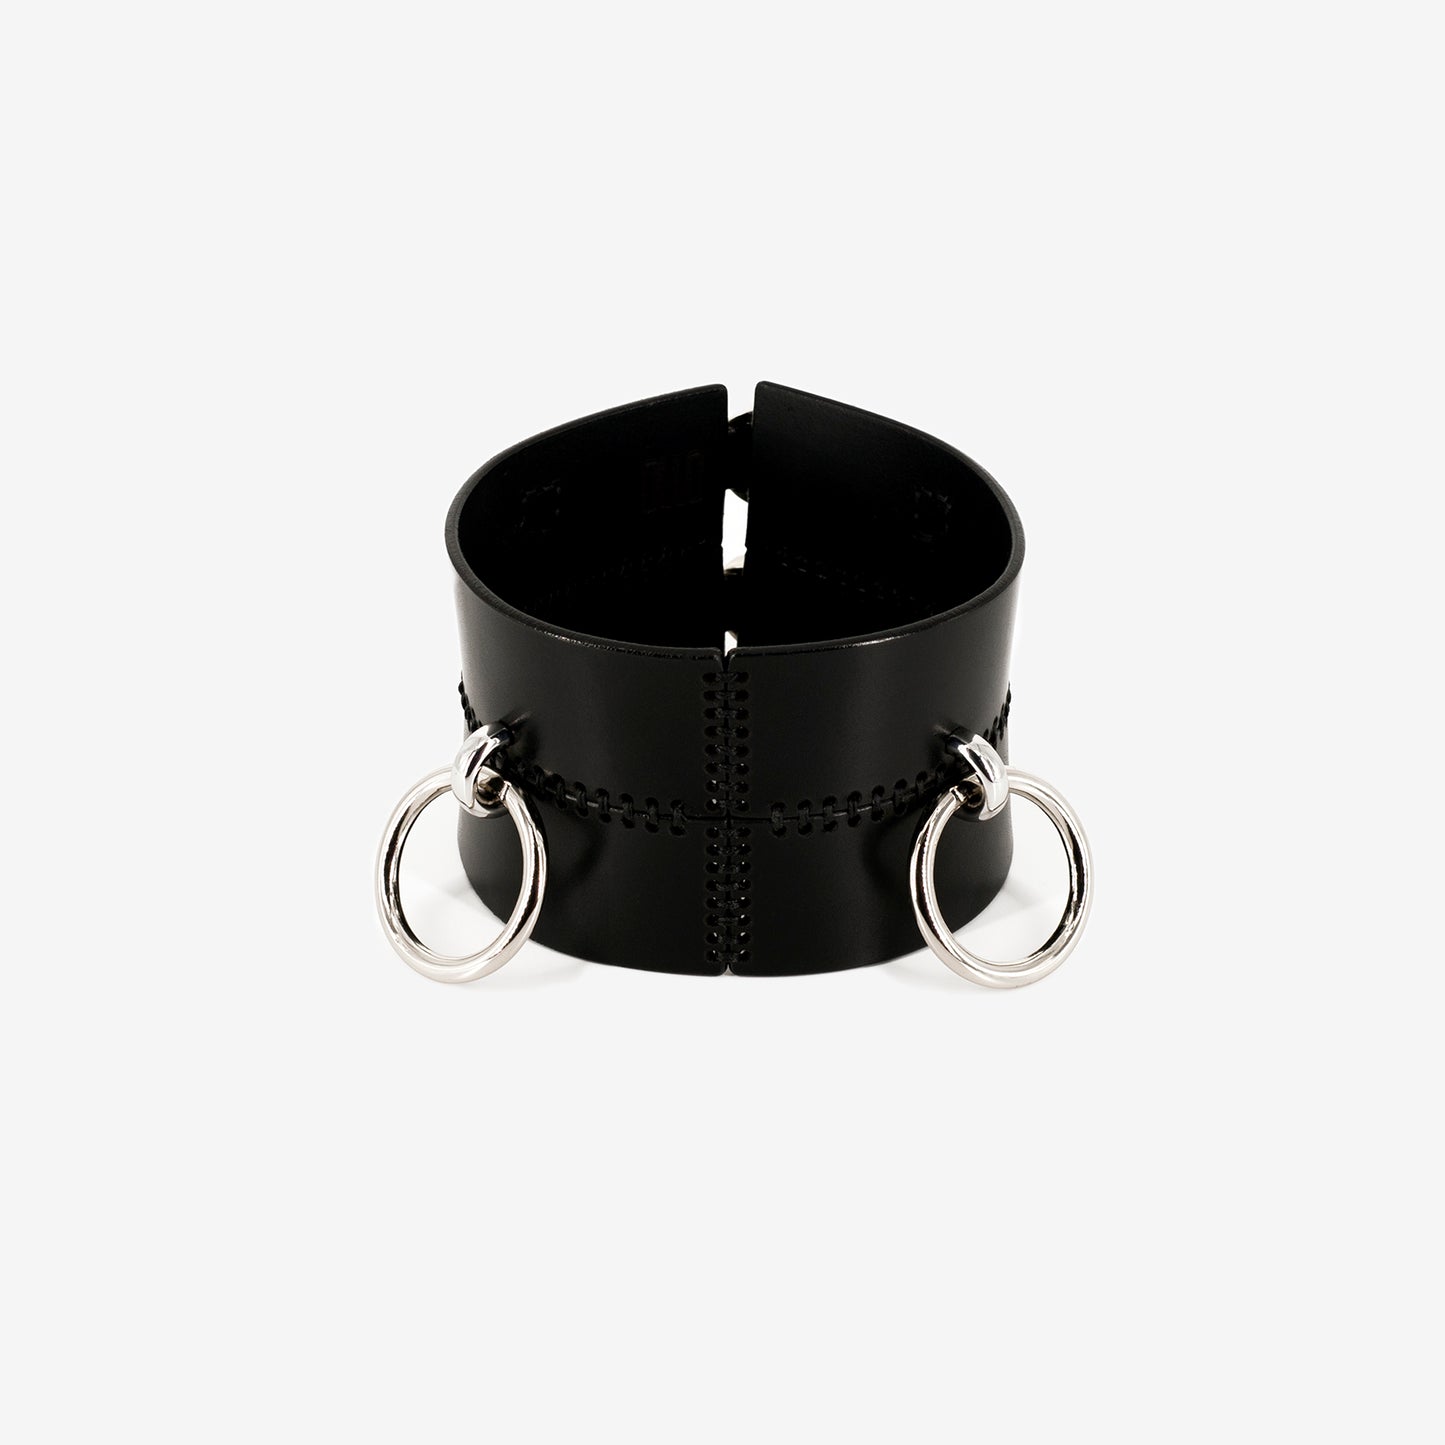 N85 Double Ring leather choker